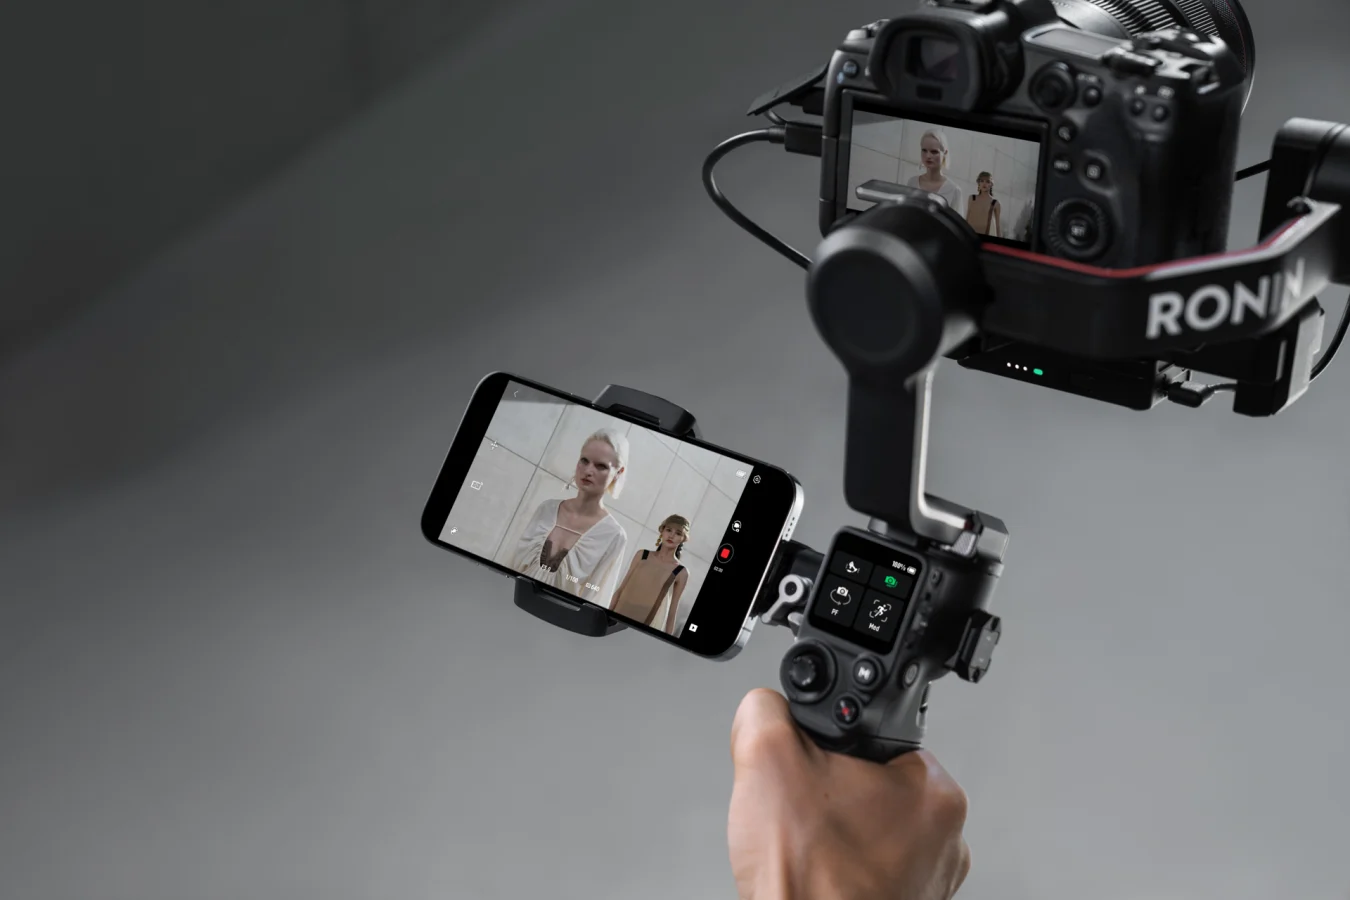 DJI's RS3 mirrorless camera stabilizer unlocks automatically and is easier to balance